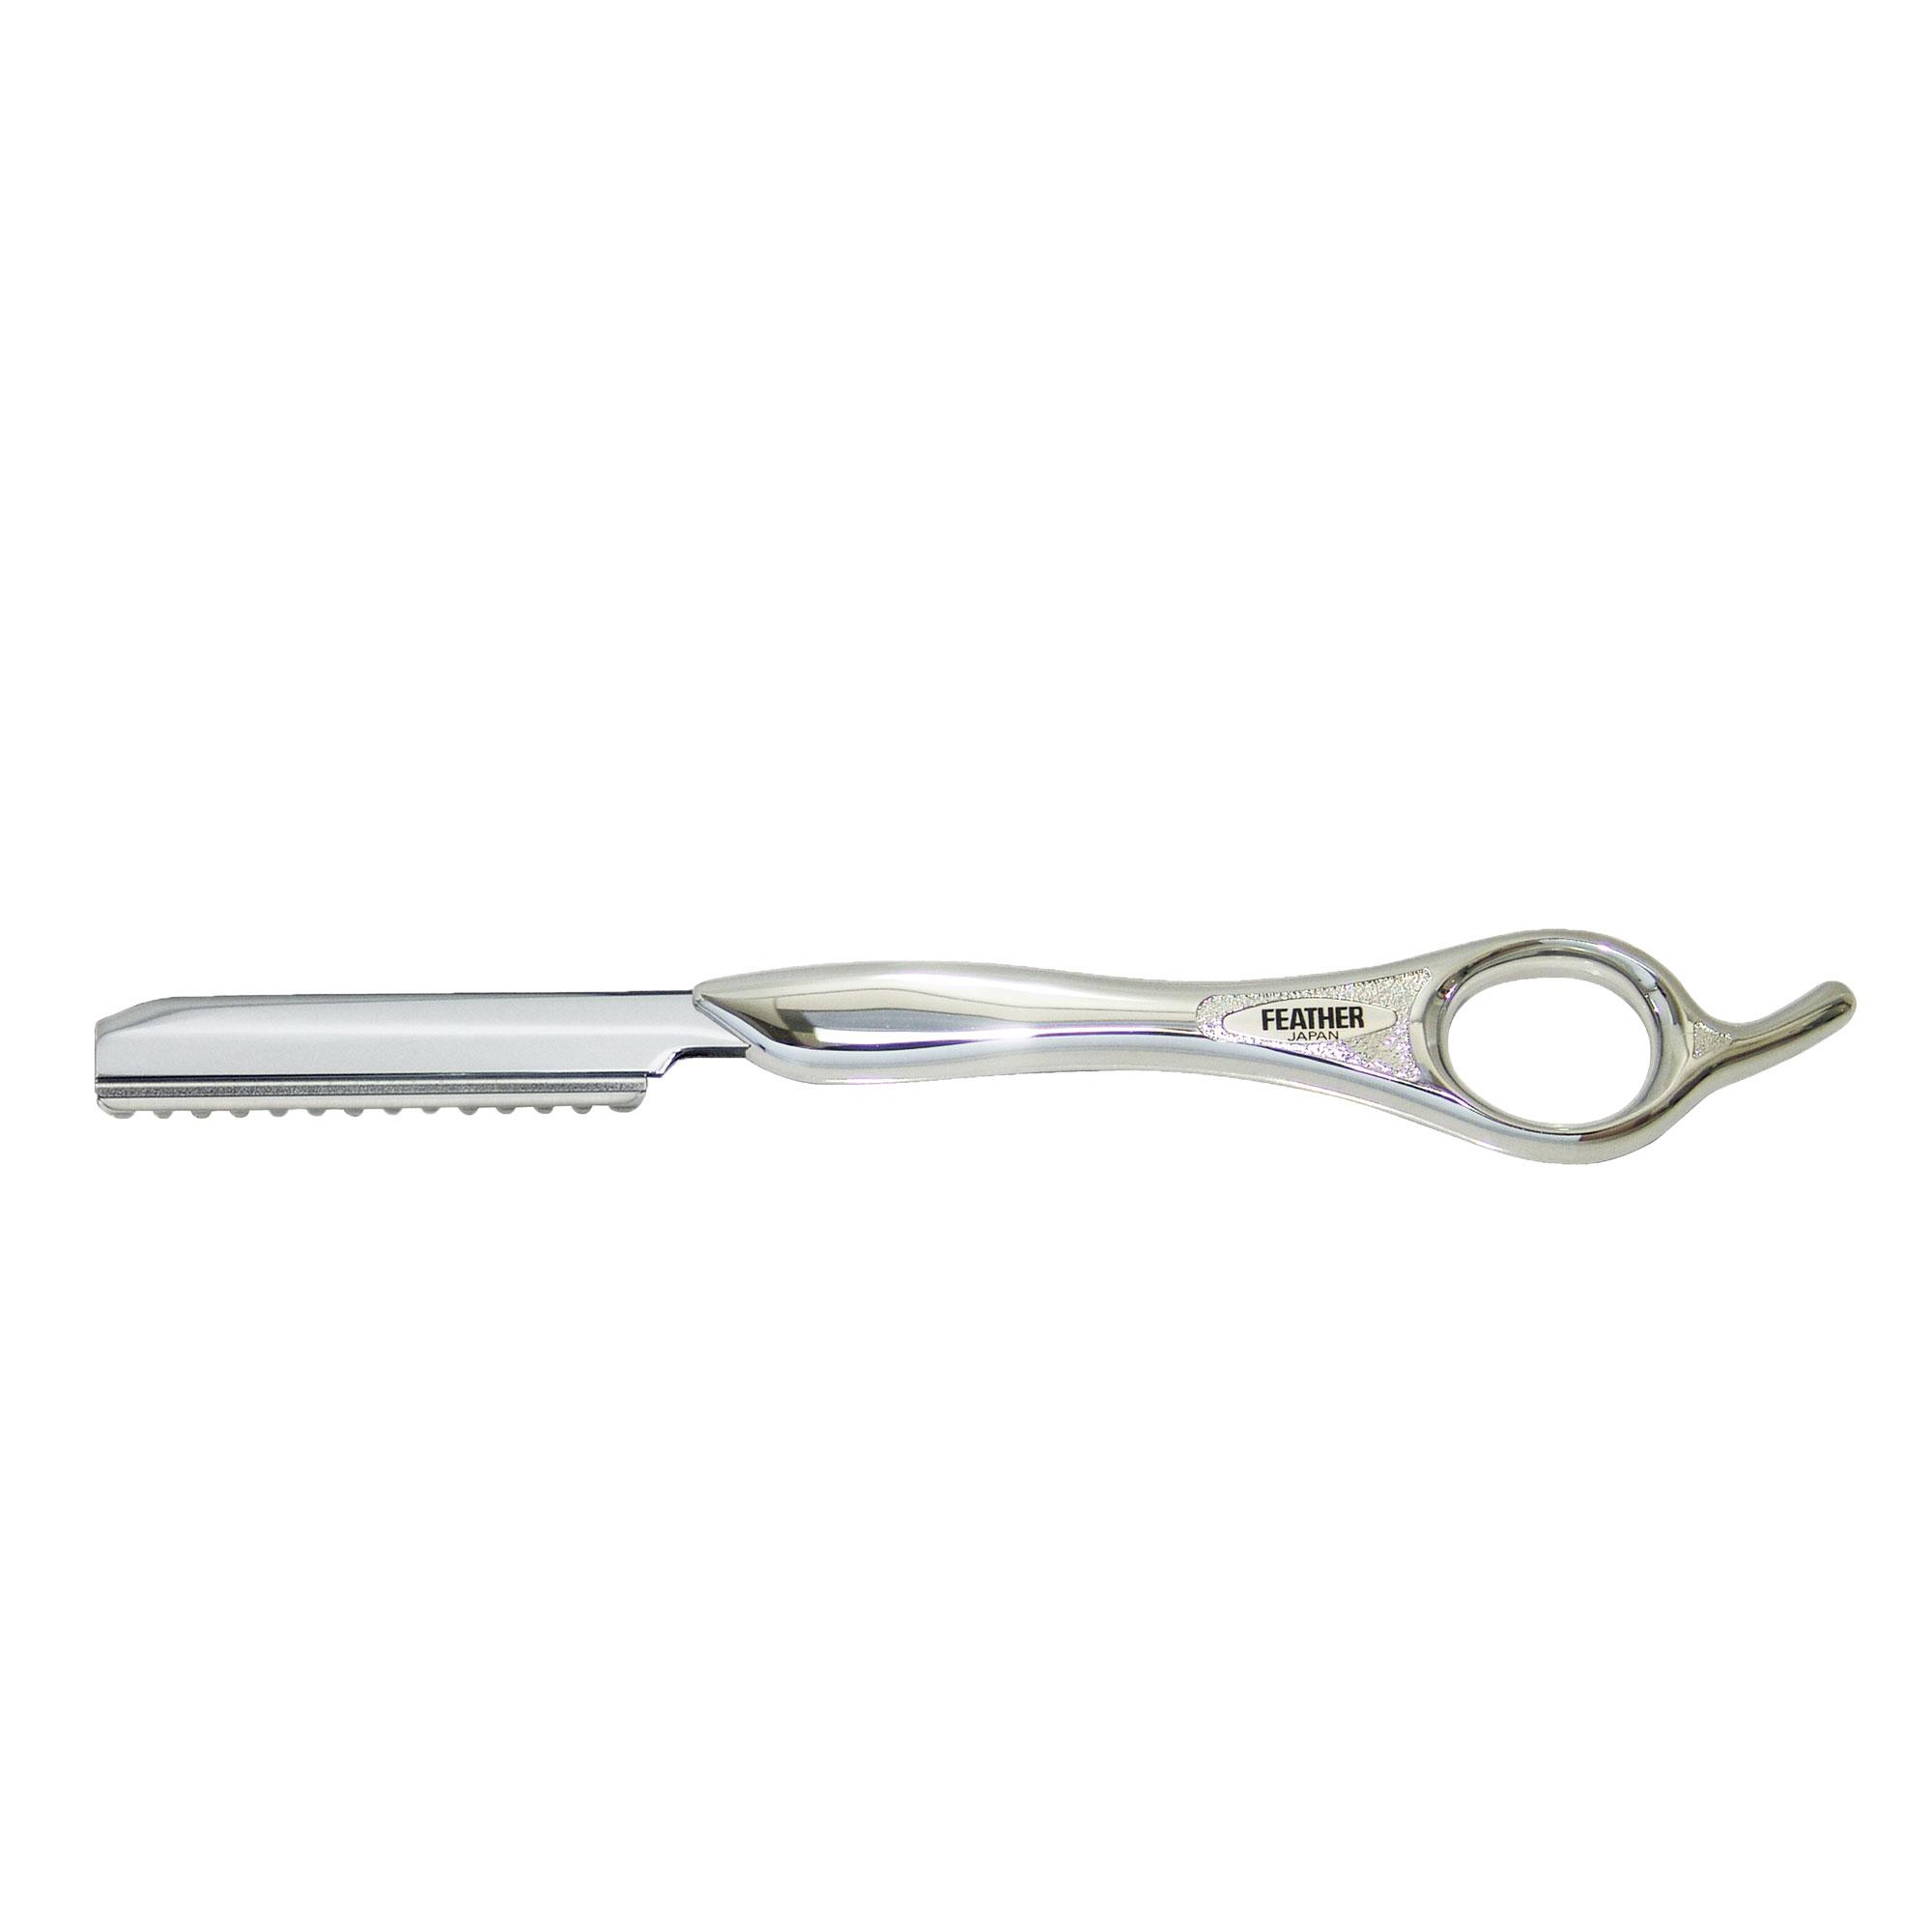 Jatai Feather Silver Styling Razor Handle 7 1/4 inches